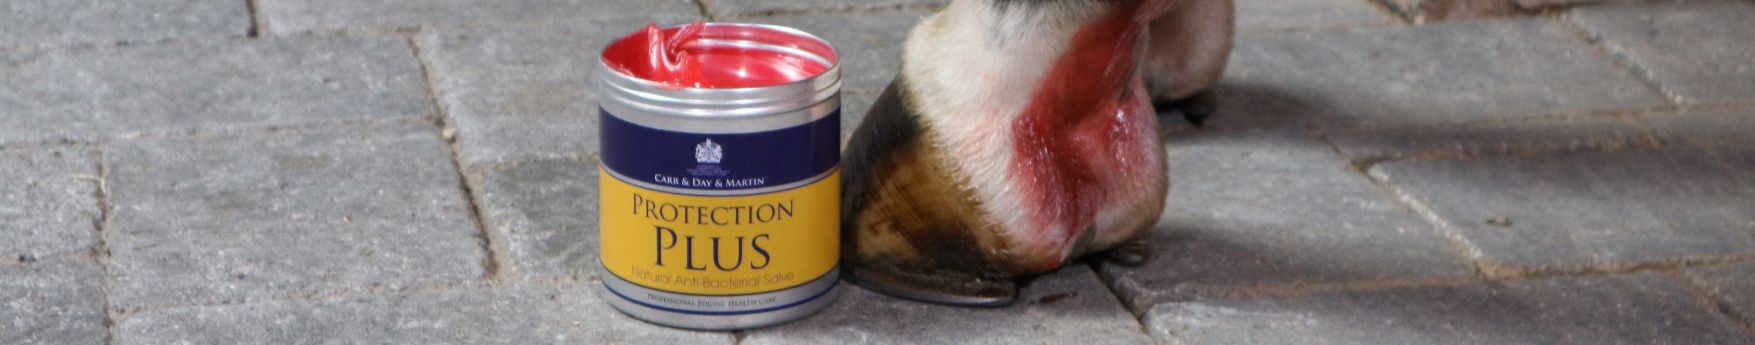 Apply Protection Plus to prevent mud fever